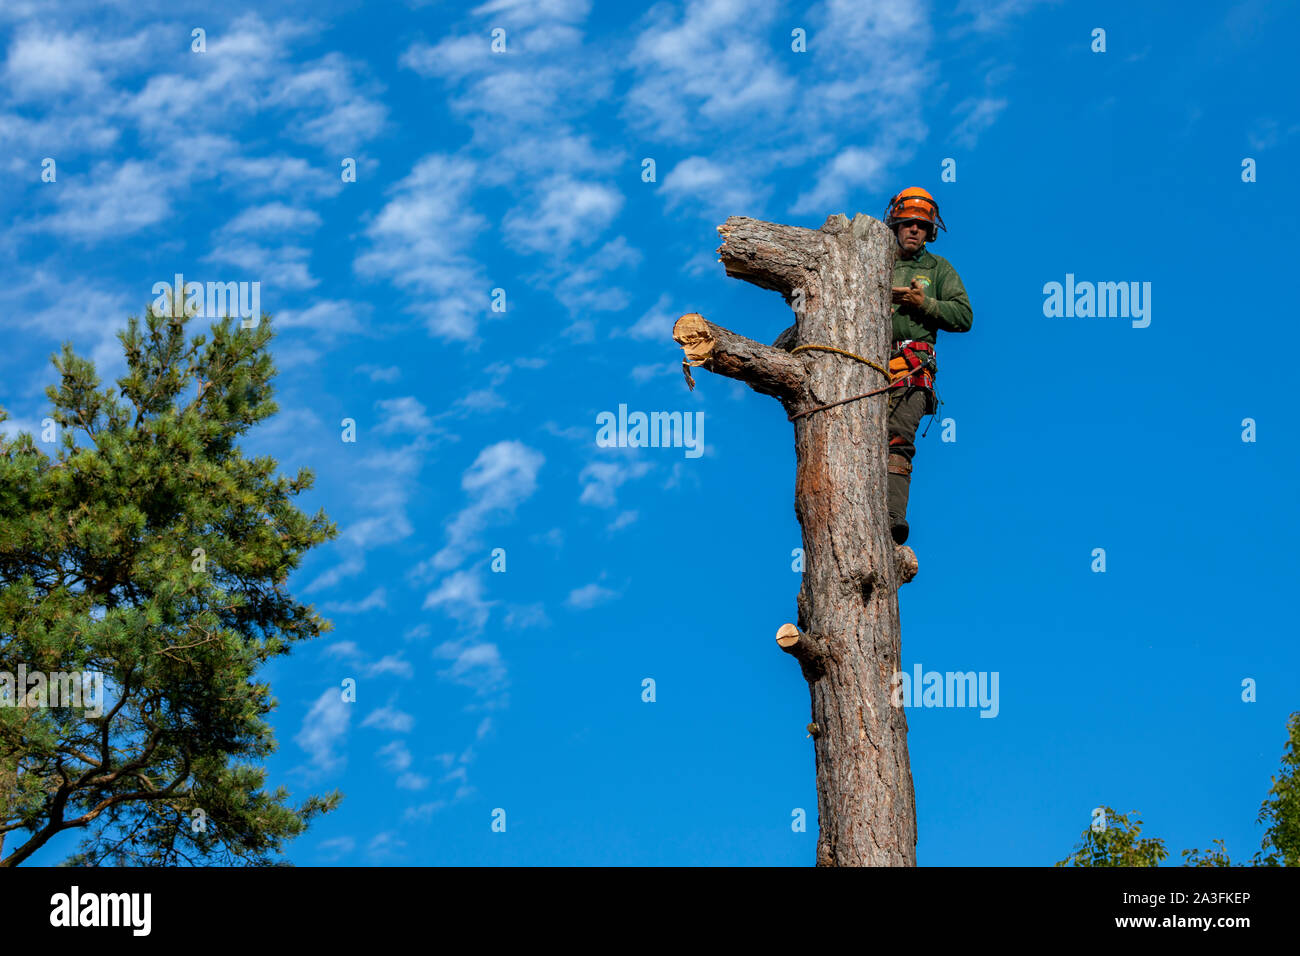 A male tree surgeon or arborist tethered to a large tree whilst cutting it with a chainsaw with a blue sky background, Wales, UK Stock Photo